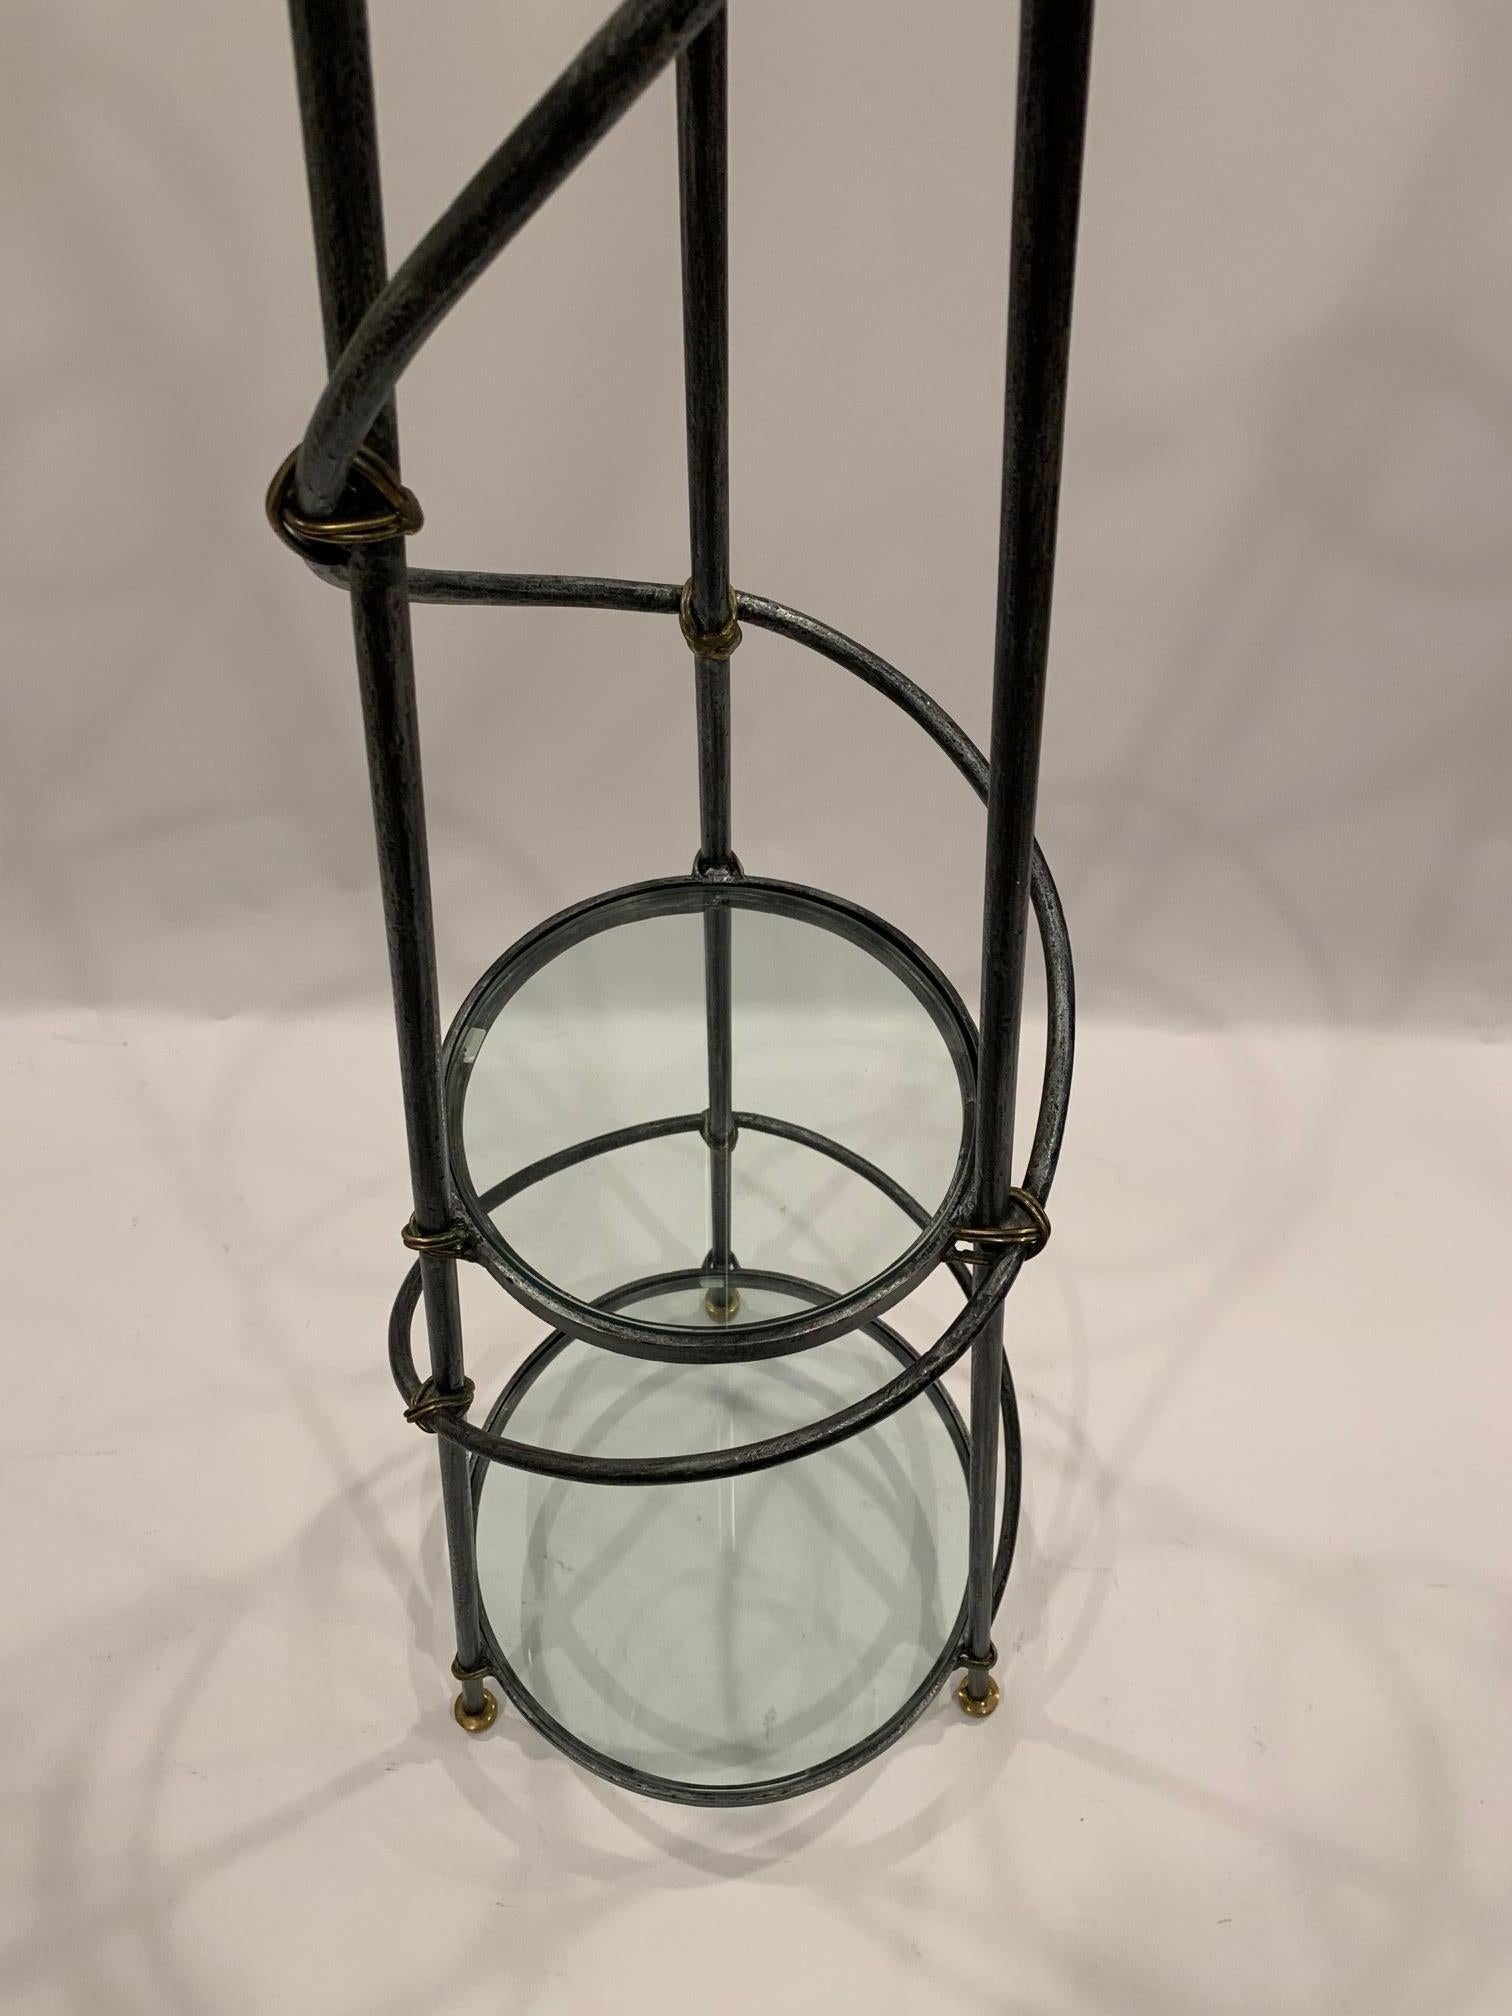 Philippine Wonderful 3 Tier Spiral Iron & Glass Etagere Shelves For Sale